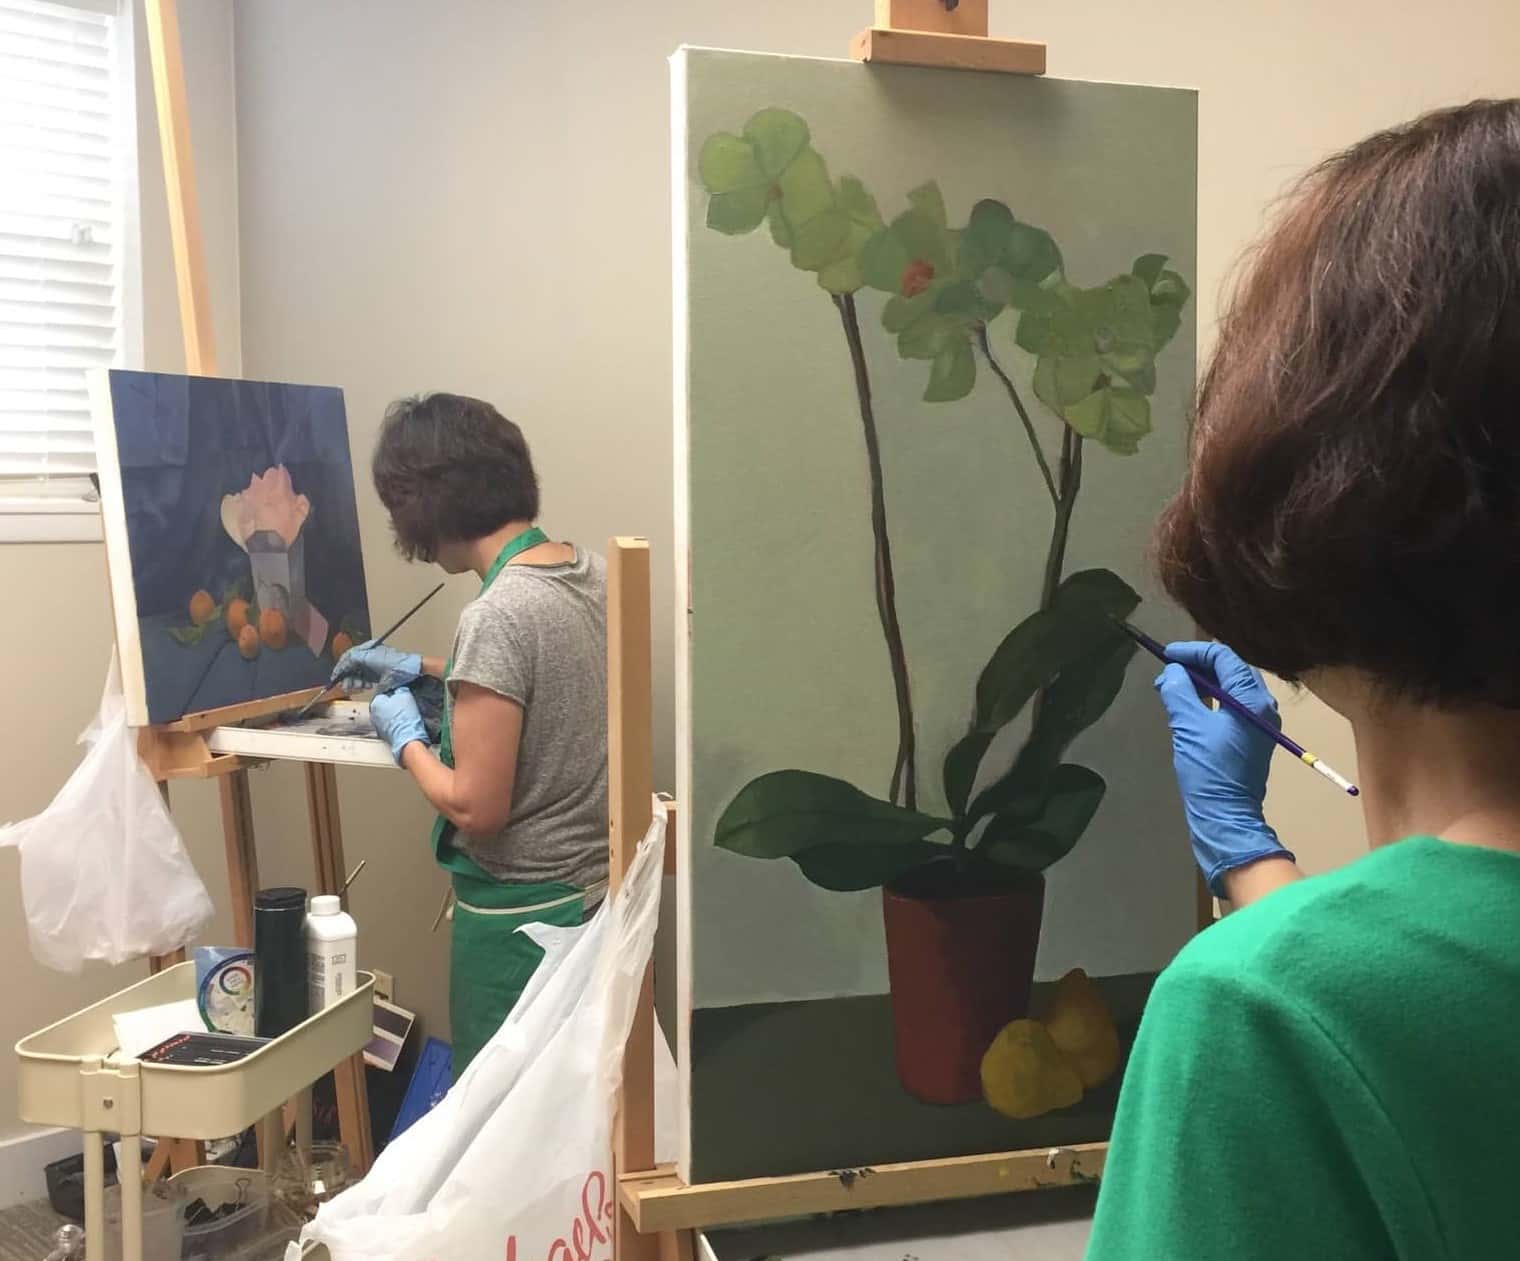 Traditional drawing and painting lessons at Highlights Art School in Lansdale